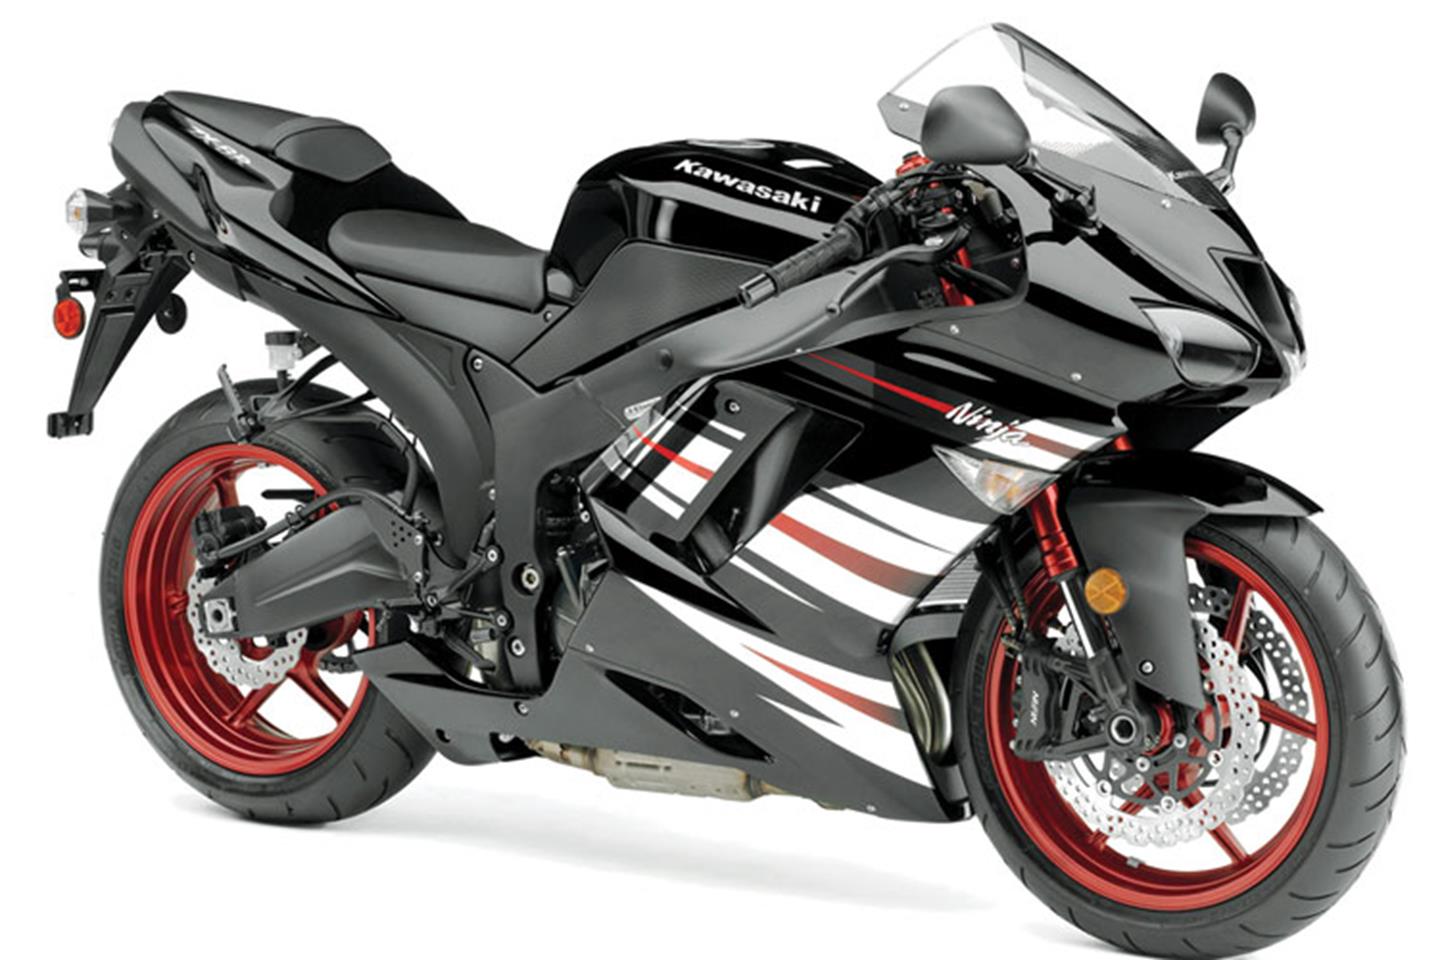 Special edition paintschemes for the 2008 Kawasaki ZX-6R and ZZR1400